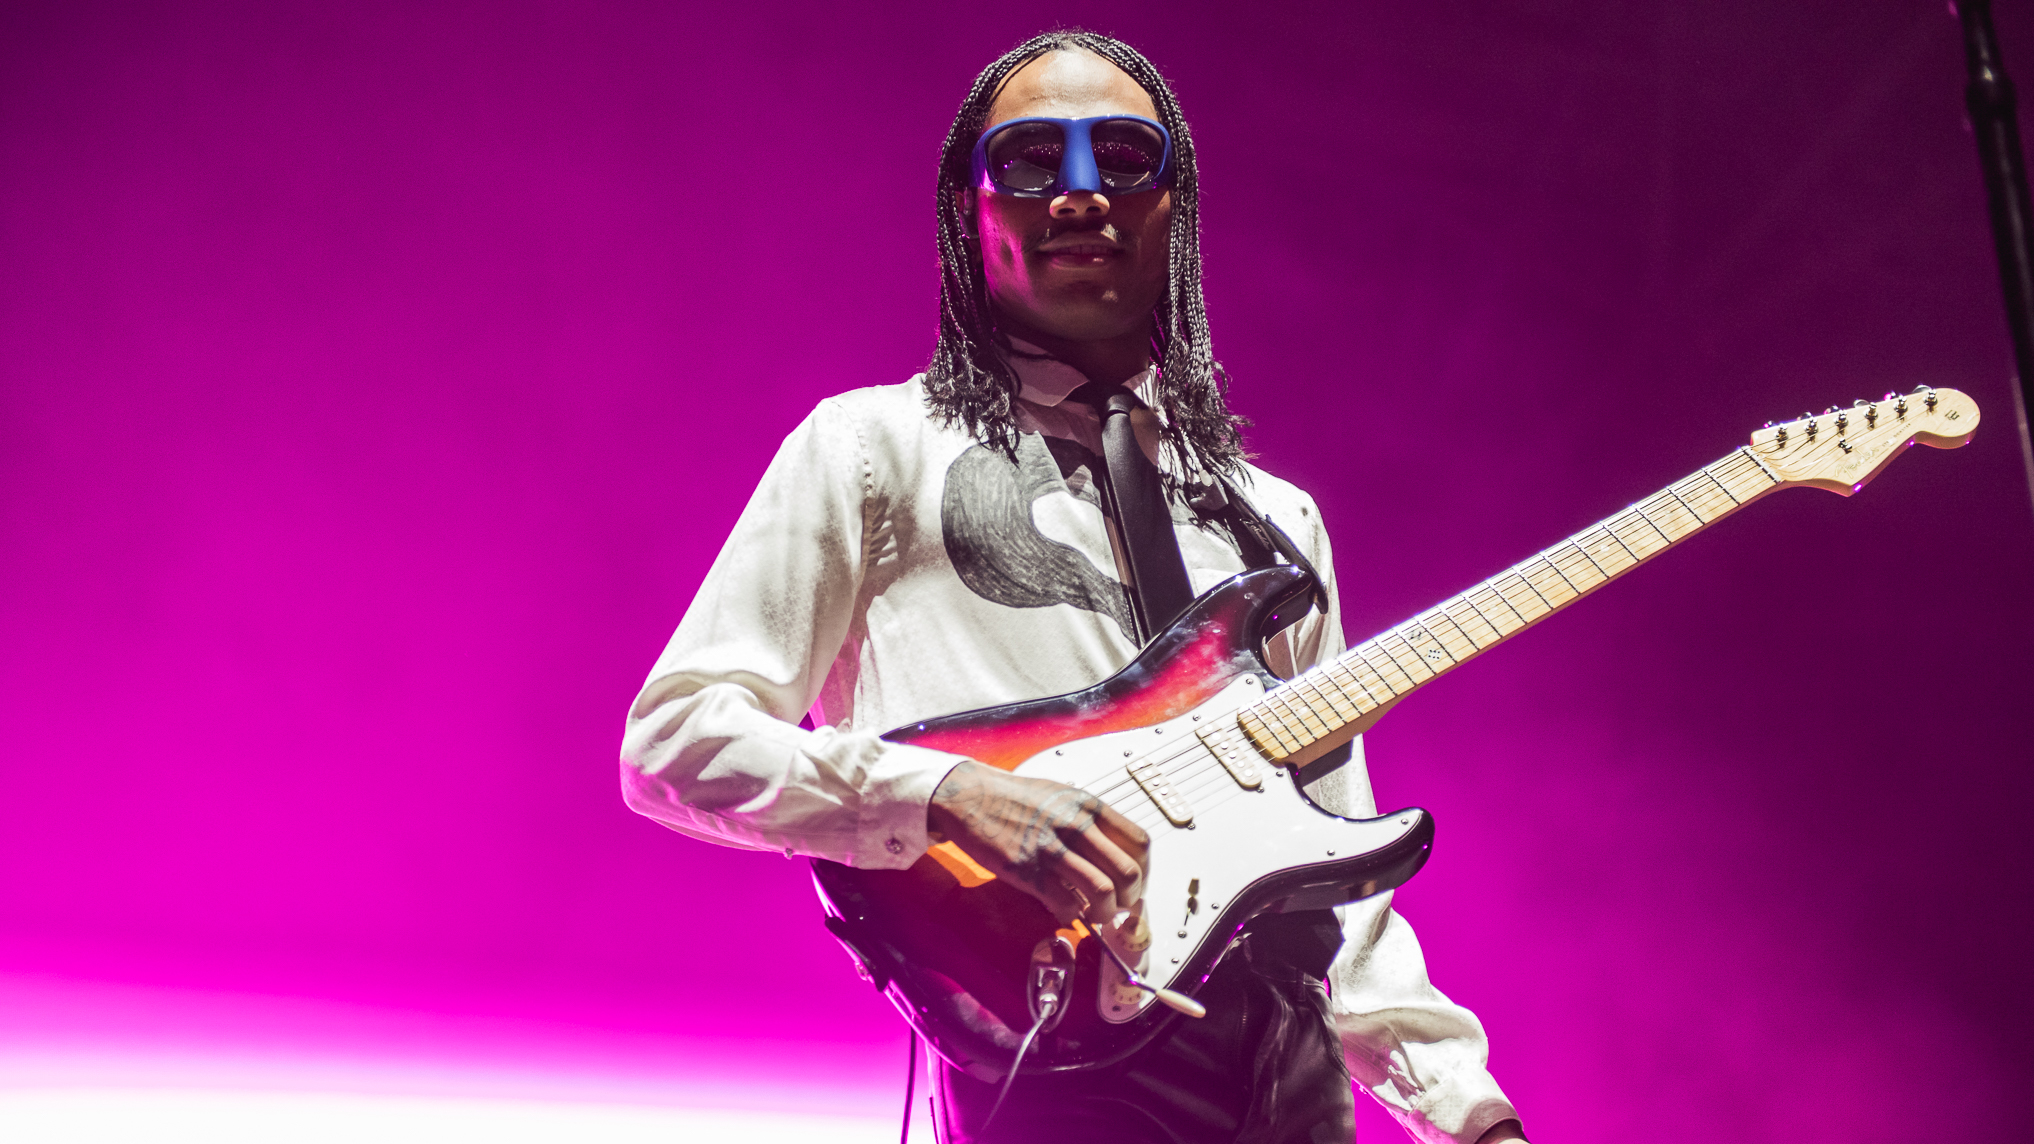 A person wearing googles and a white long sleeve t-shirt playing a guitar against a bright purple background.